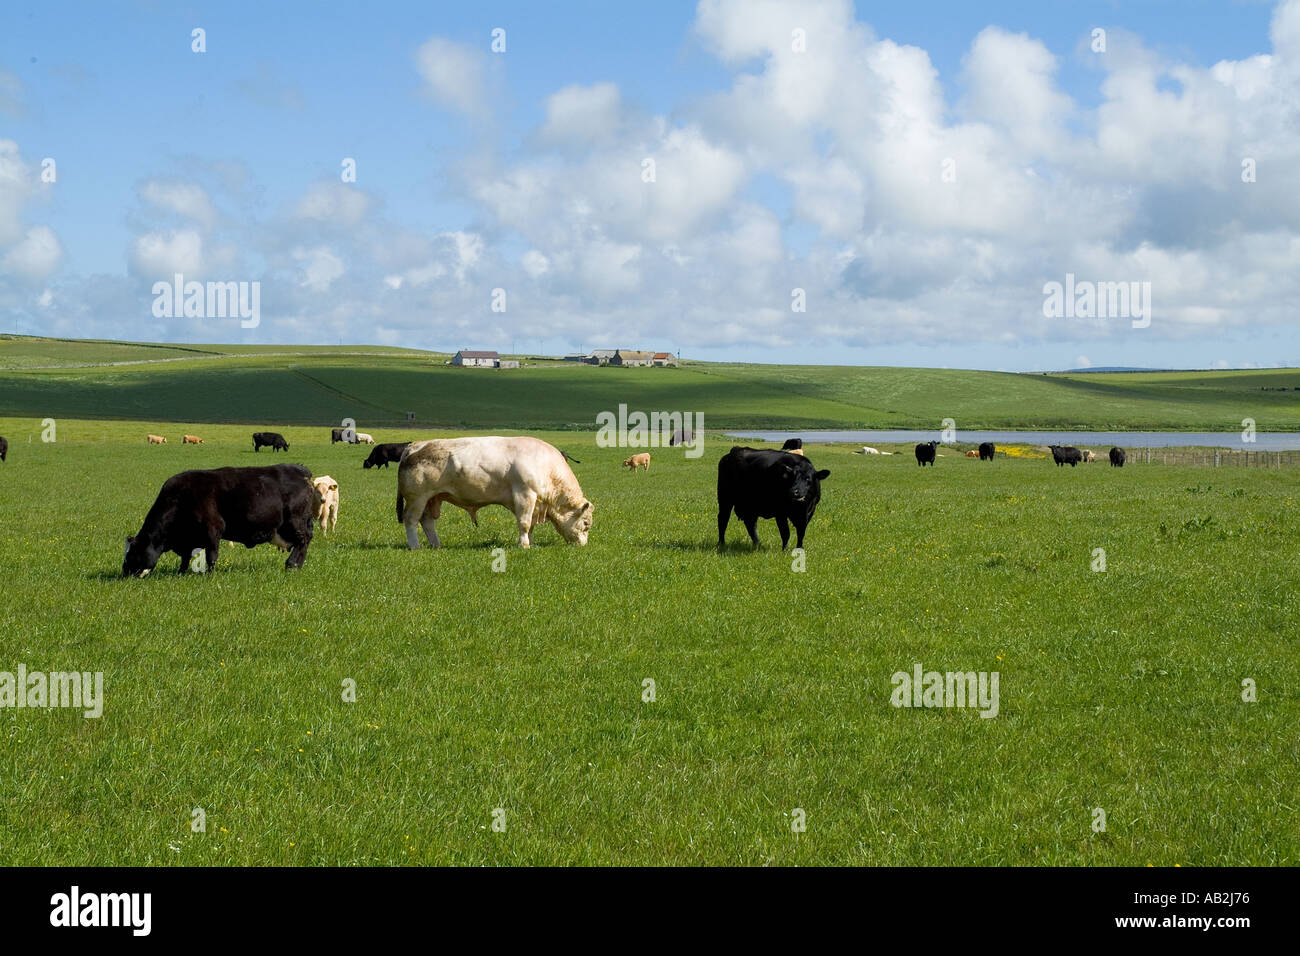 dh Scottish beef cows CATTLE UK FARM ANIMALS White bull animals cow Scotland herd grazing uk farming field orkney on grass Stock Photo